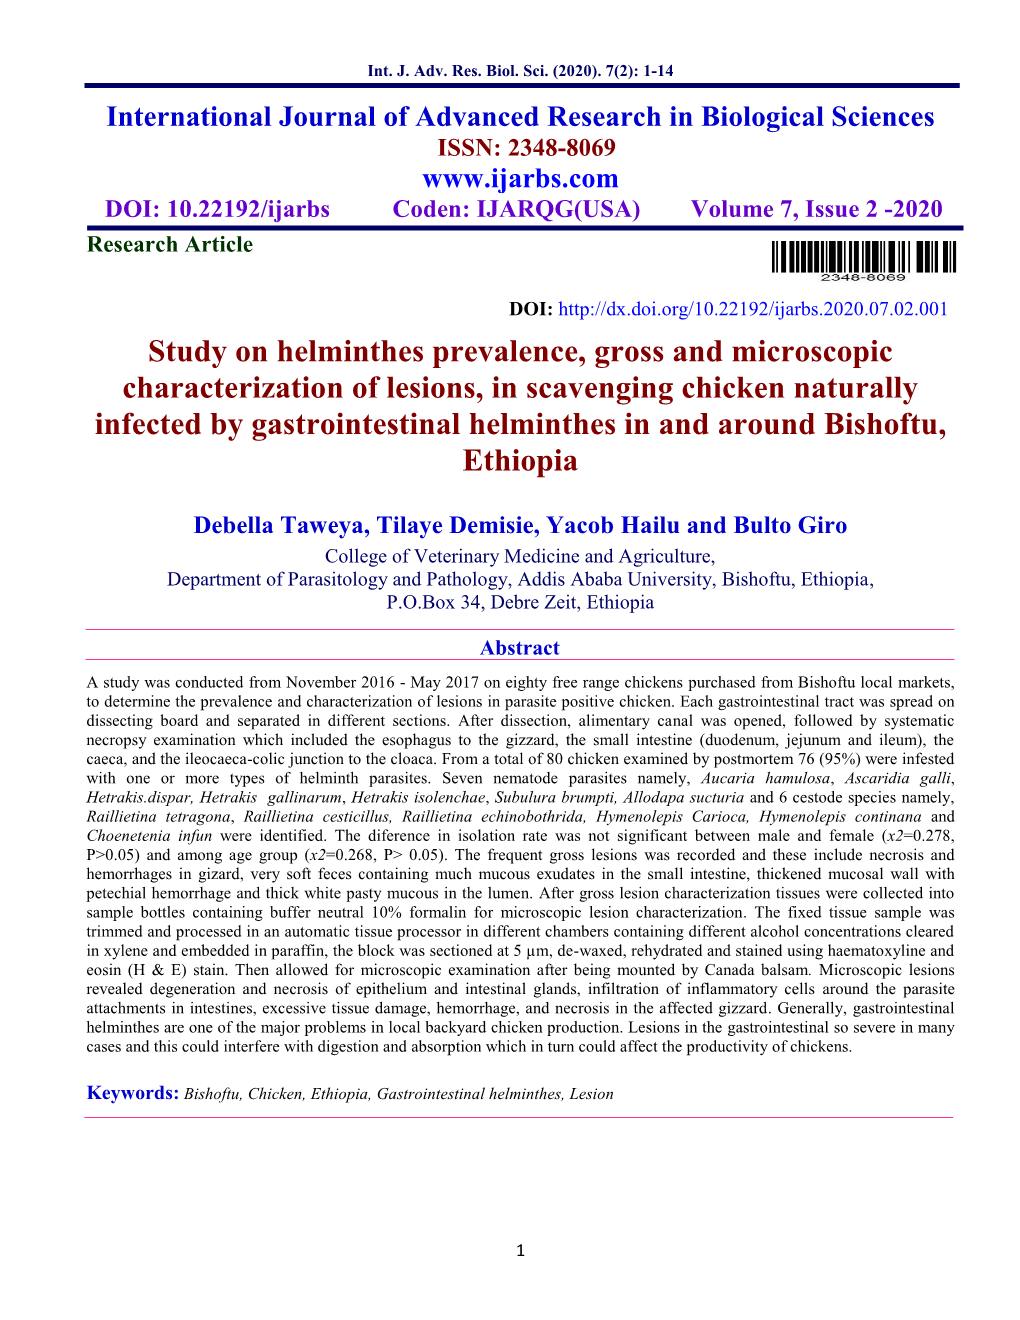 Study on Helminthes Prevalence, Gross and Microscopic